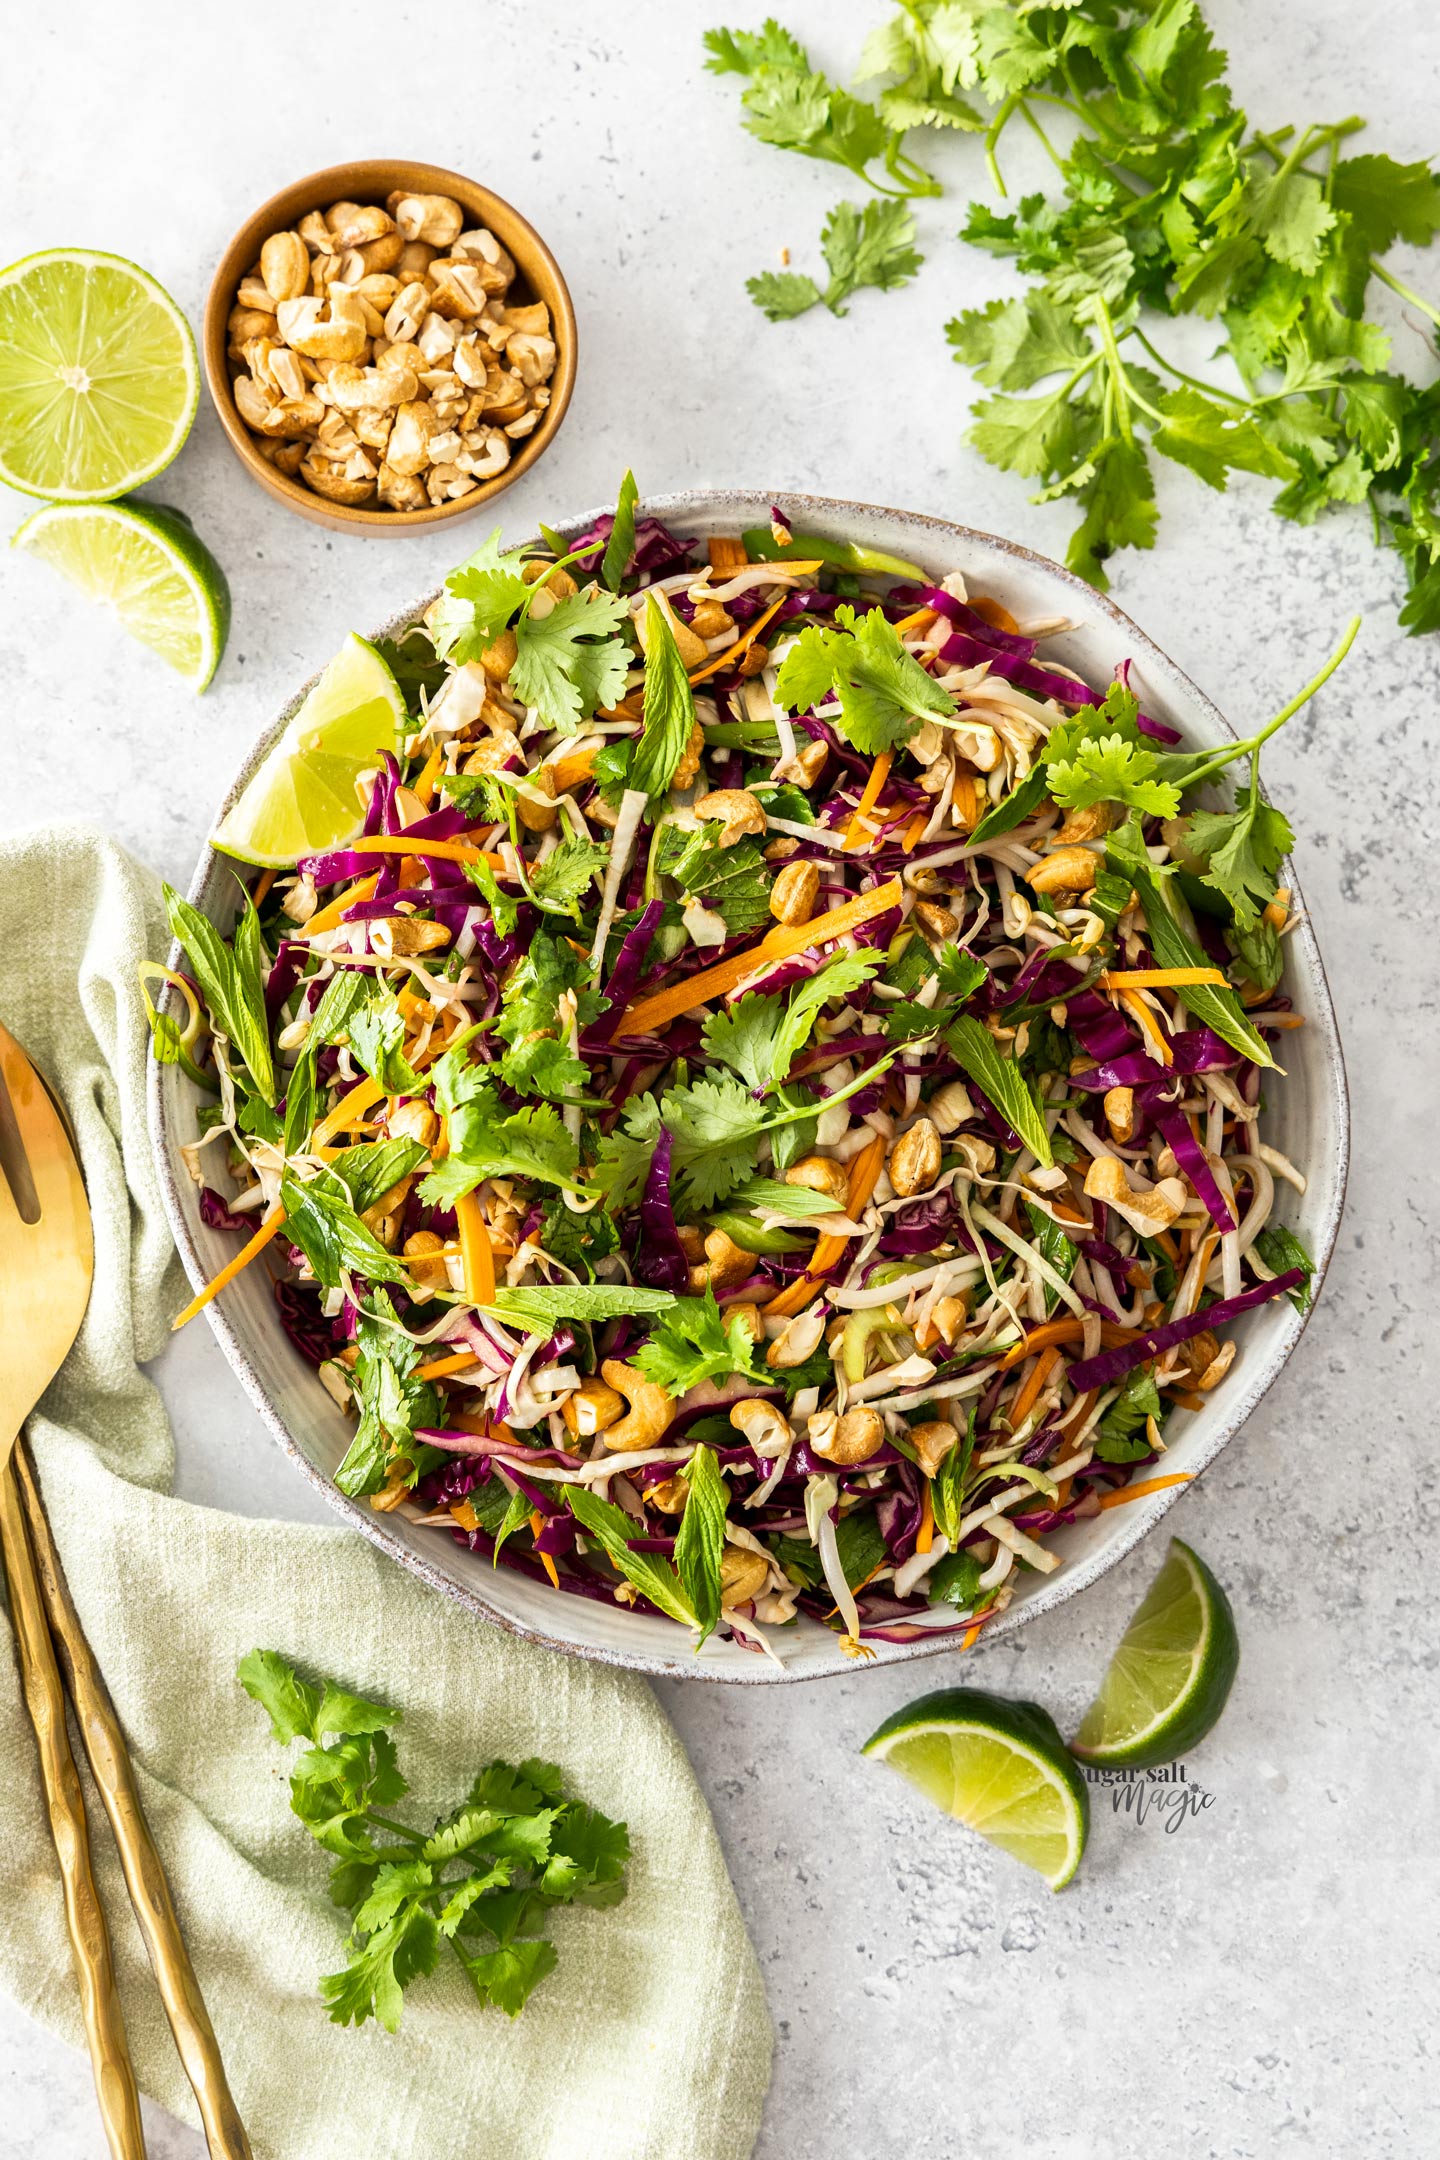 Top down view of vibrant asian salad in a bowl.